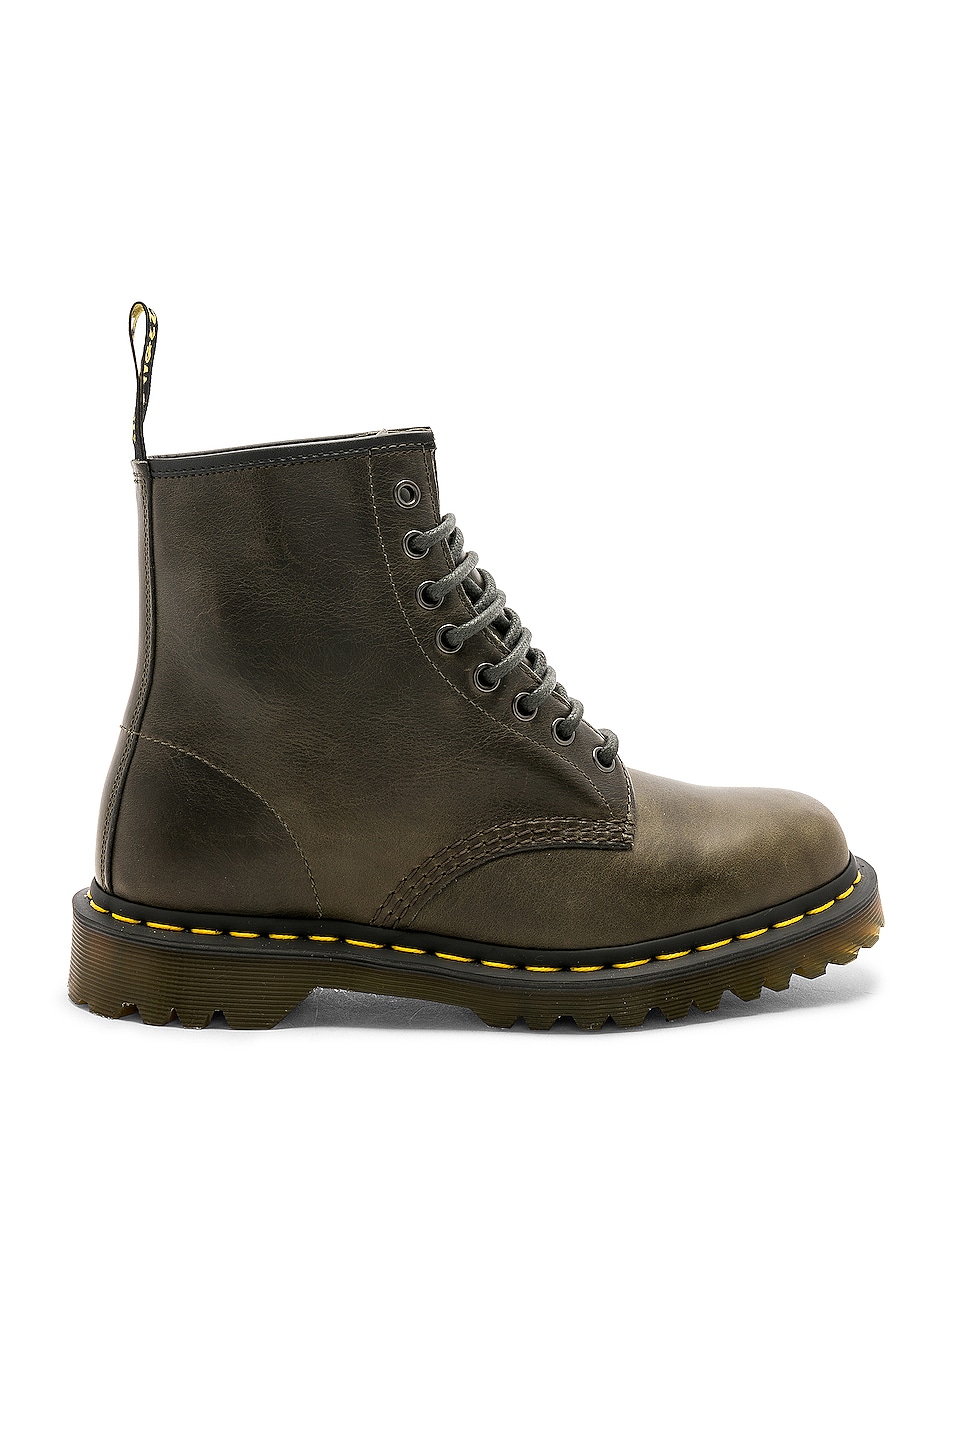 Image 1 of Dr. Martens Orleans 1460 8 Eye Boot in Dark Taupe